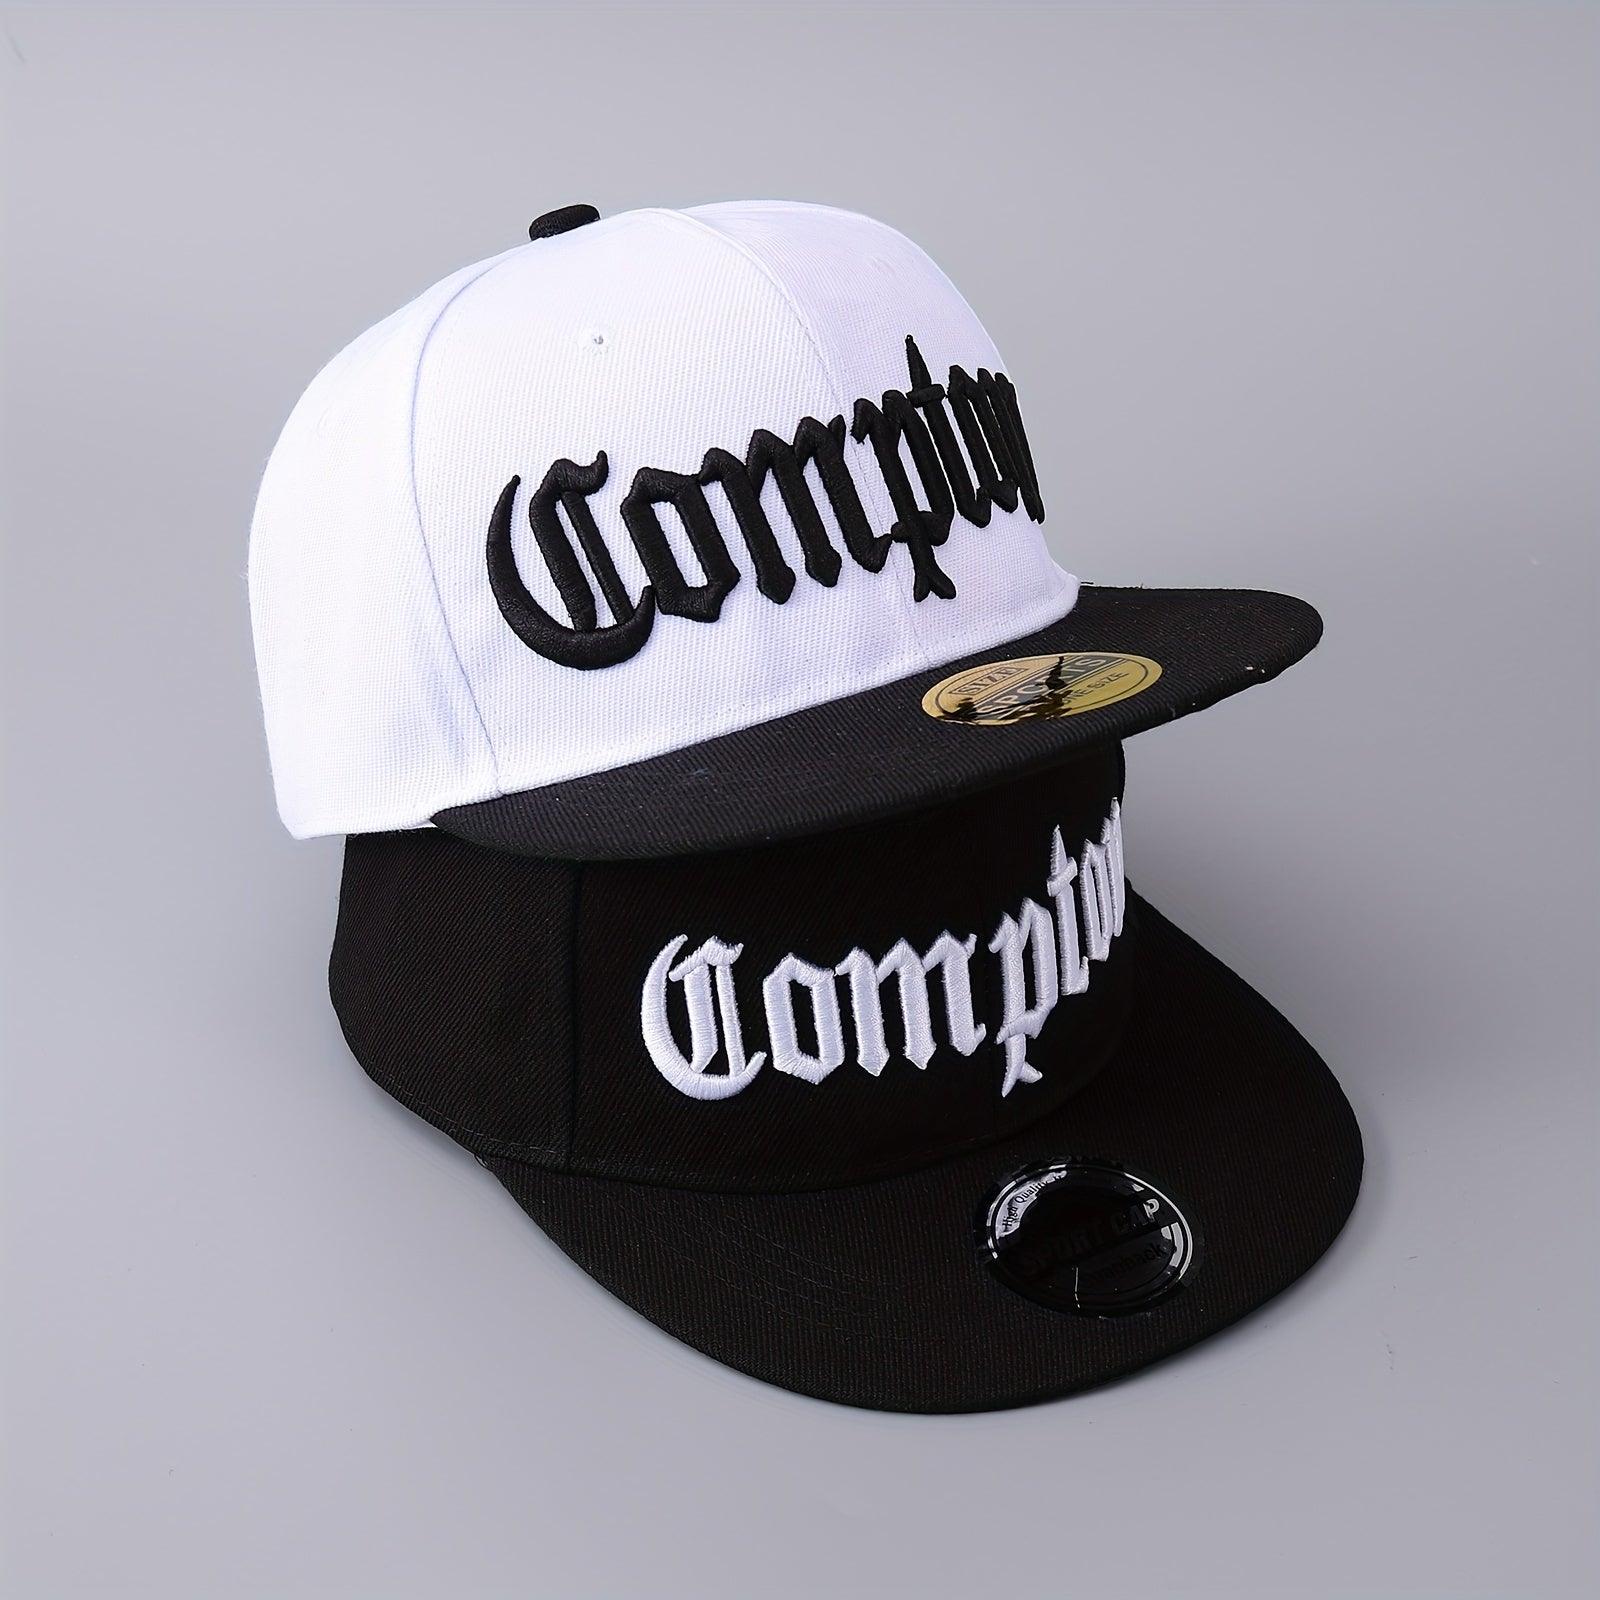 compton-embroidered-snapback-cap